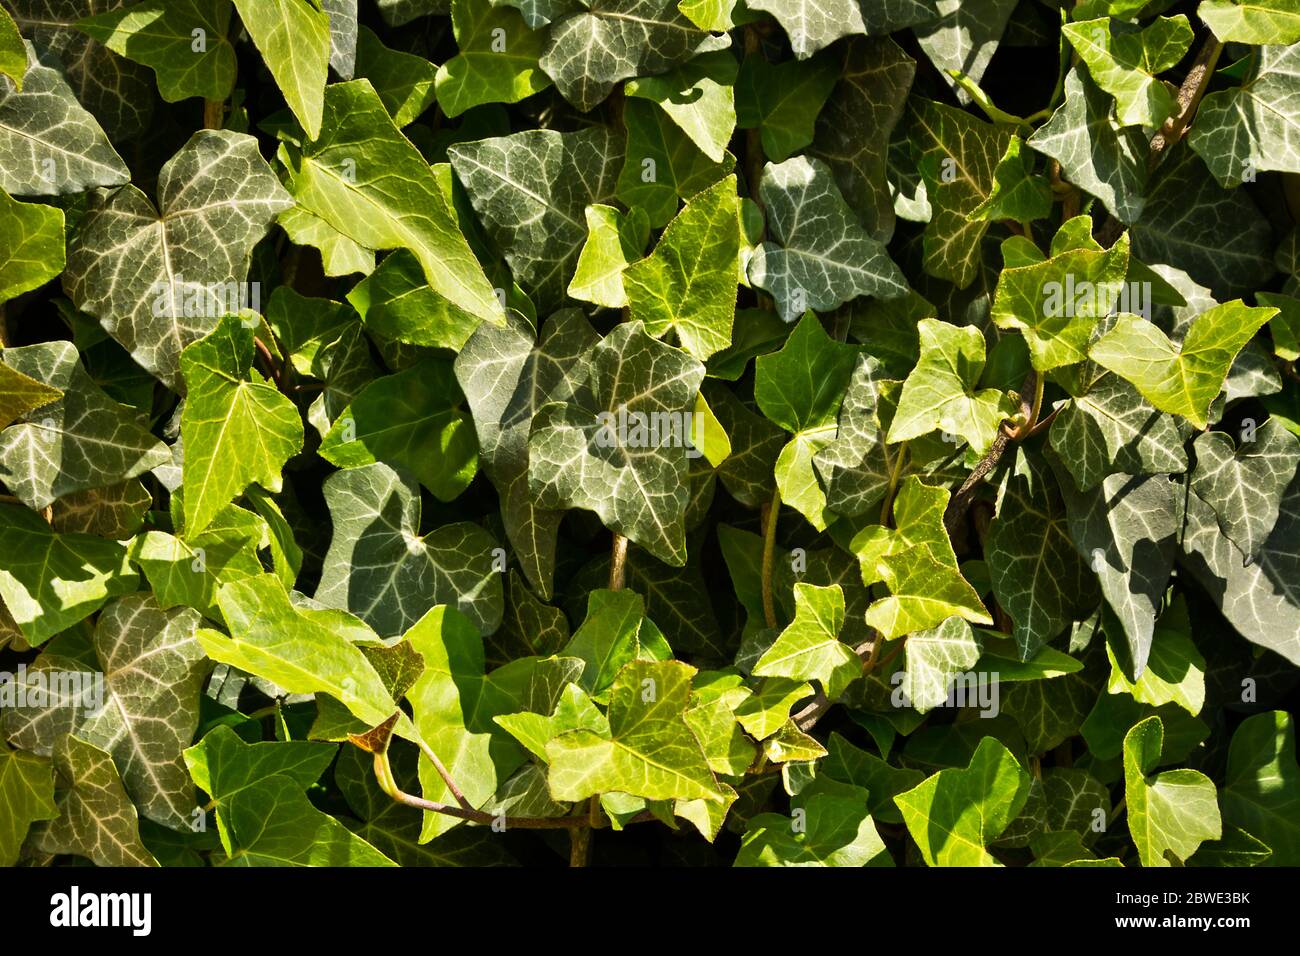 Background, green ivy leaves in the garden Stock Photo